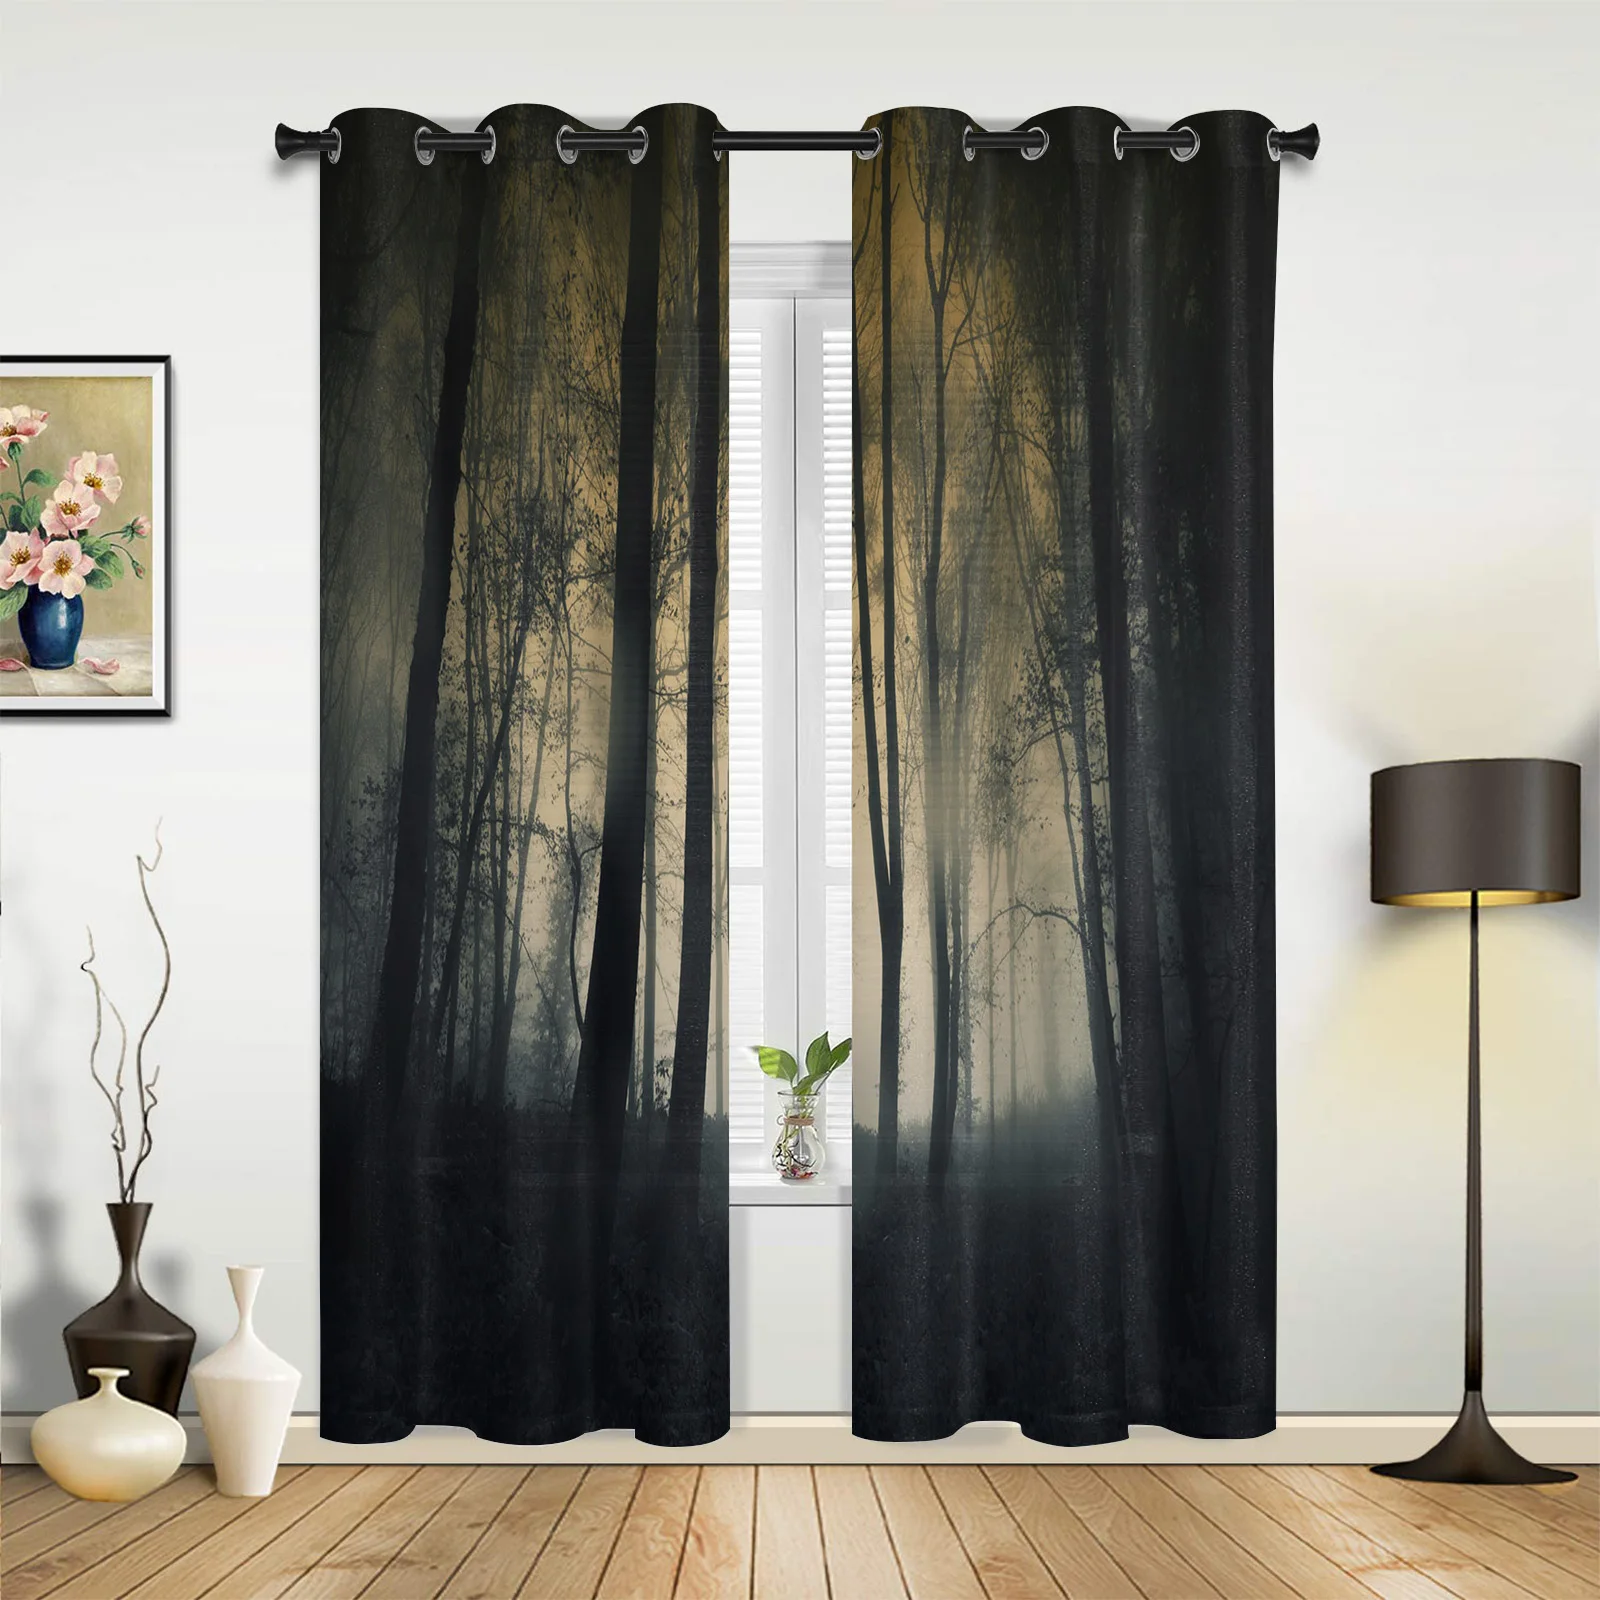 

Dark Forest Jungle Woods Horror Black Curtains for Bedroom Living Room Drapes Kitchen Children's Room Window Curtain Home Decor